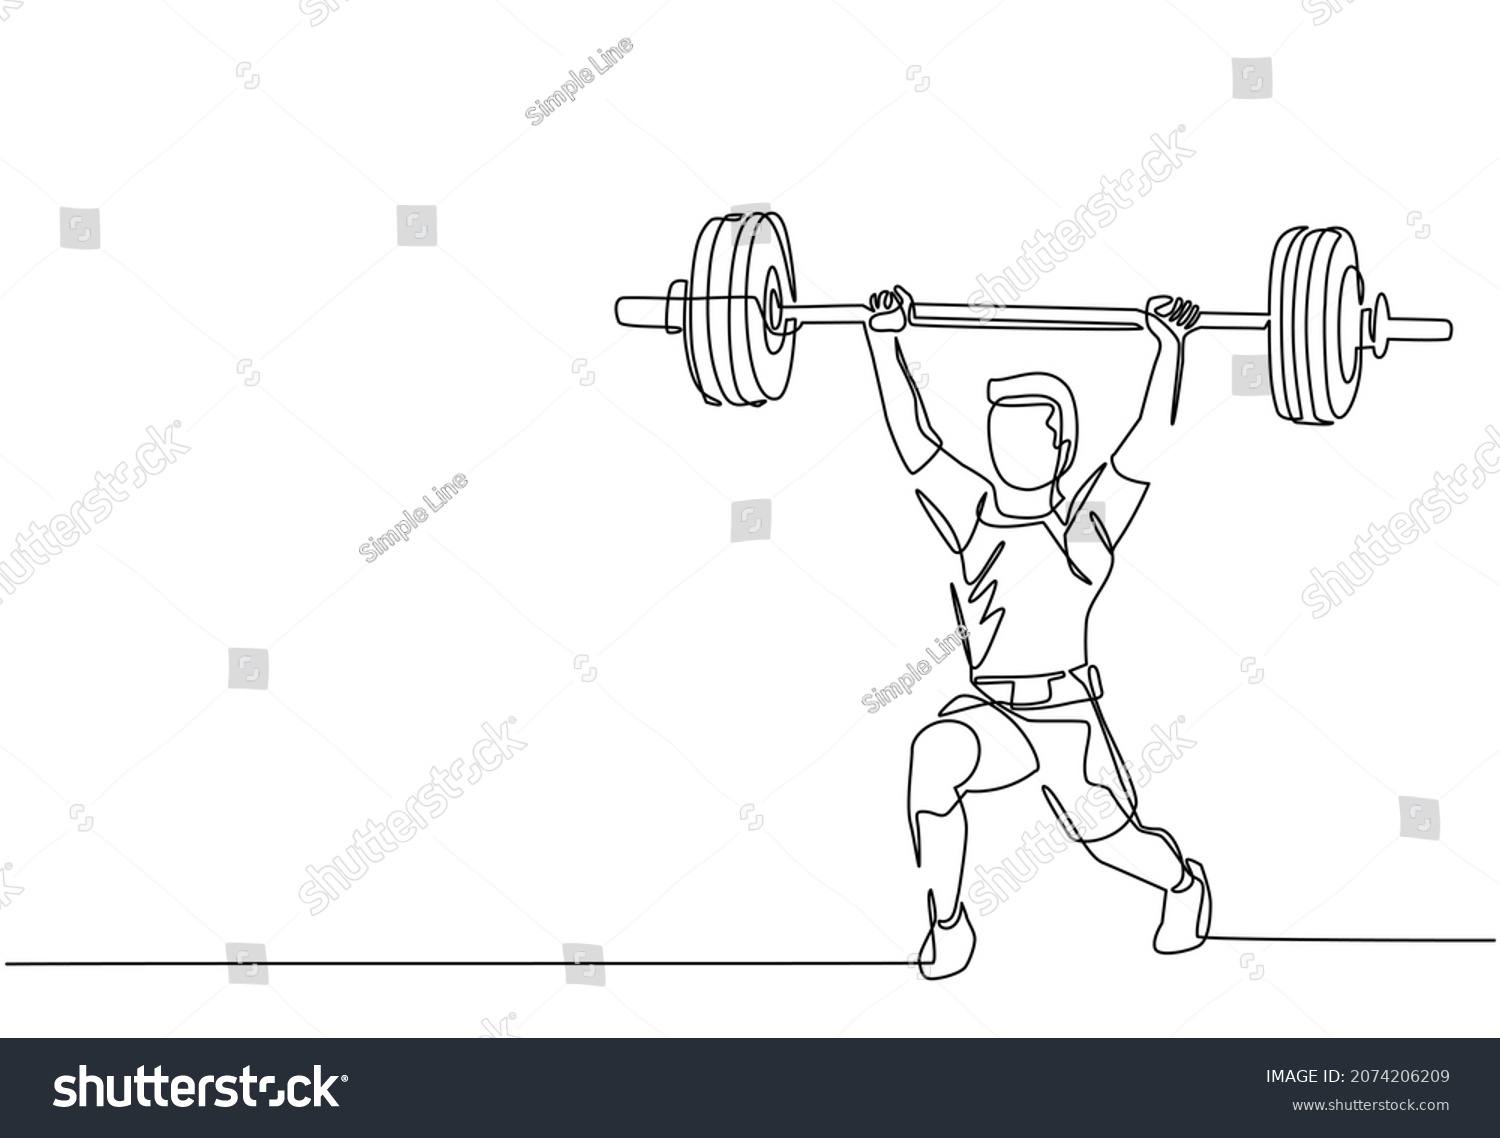 SVG of Continuous one line drawing young bodybuilder man doing exercise with a heavy weight bar in gym. Powerlifter train weightlifting. Healthy concept. Single line draw design vector graphic illustration svg